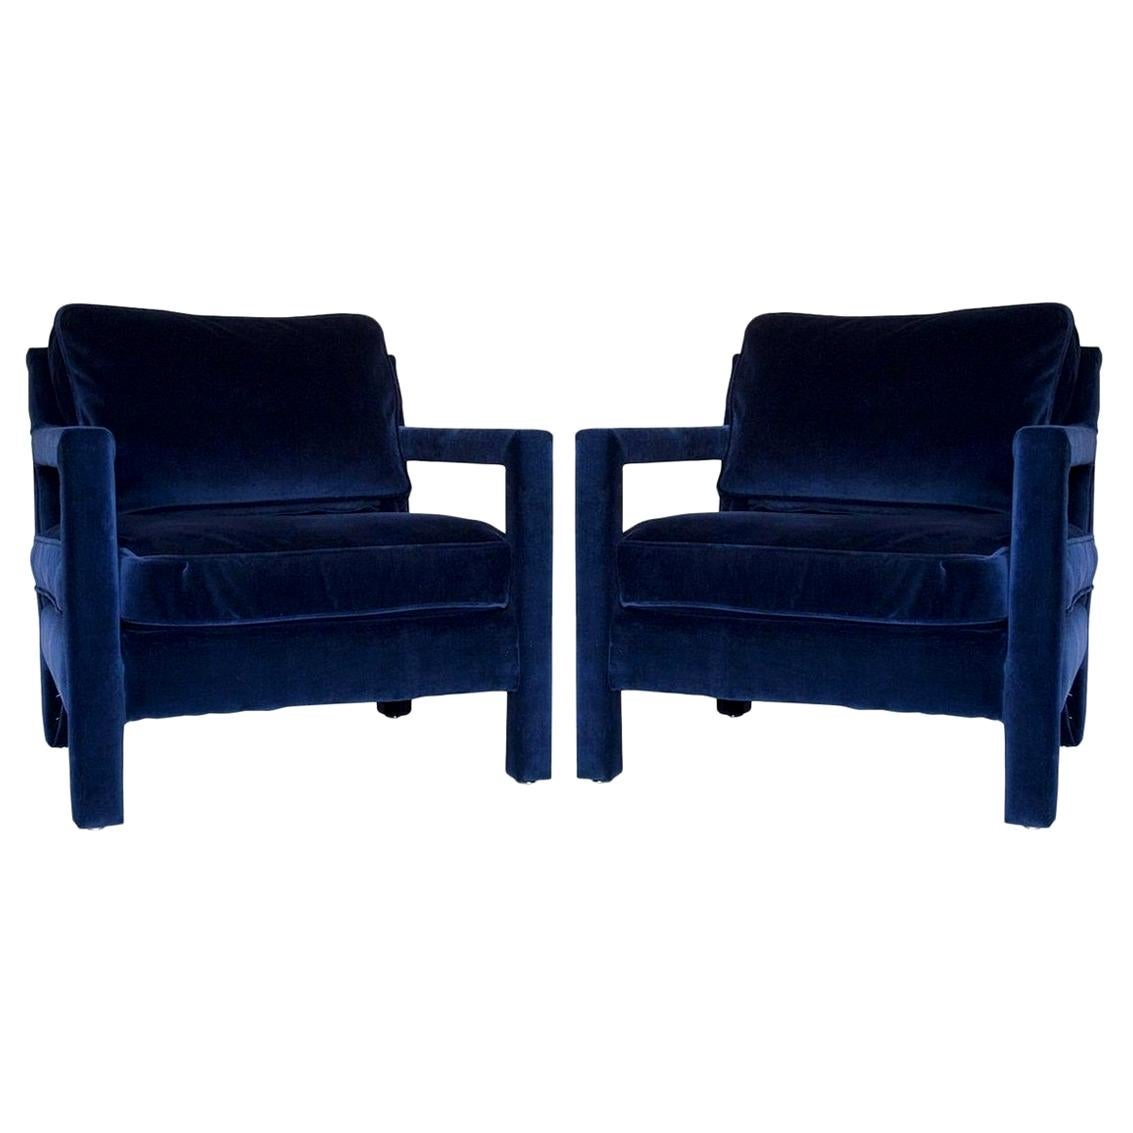 Pair of Milo Baughman Style Parsons Chairs in Blue Velvet